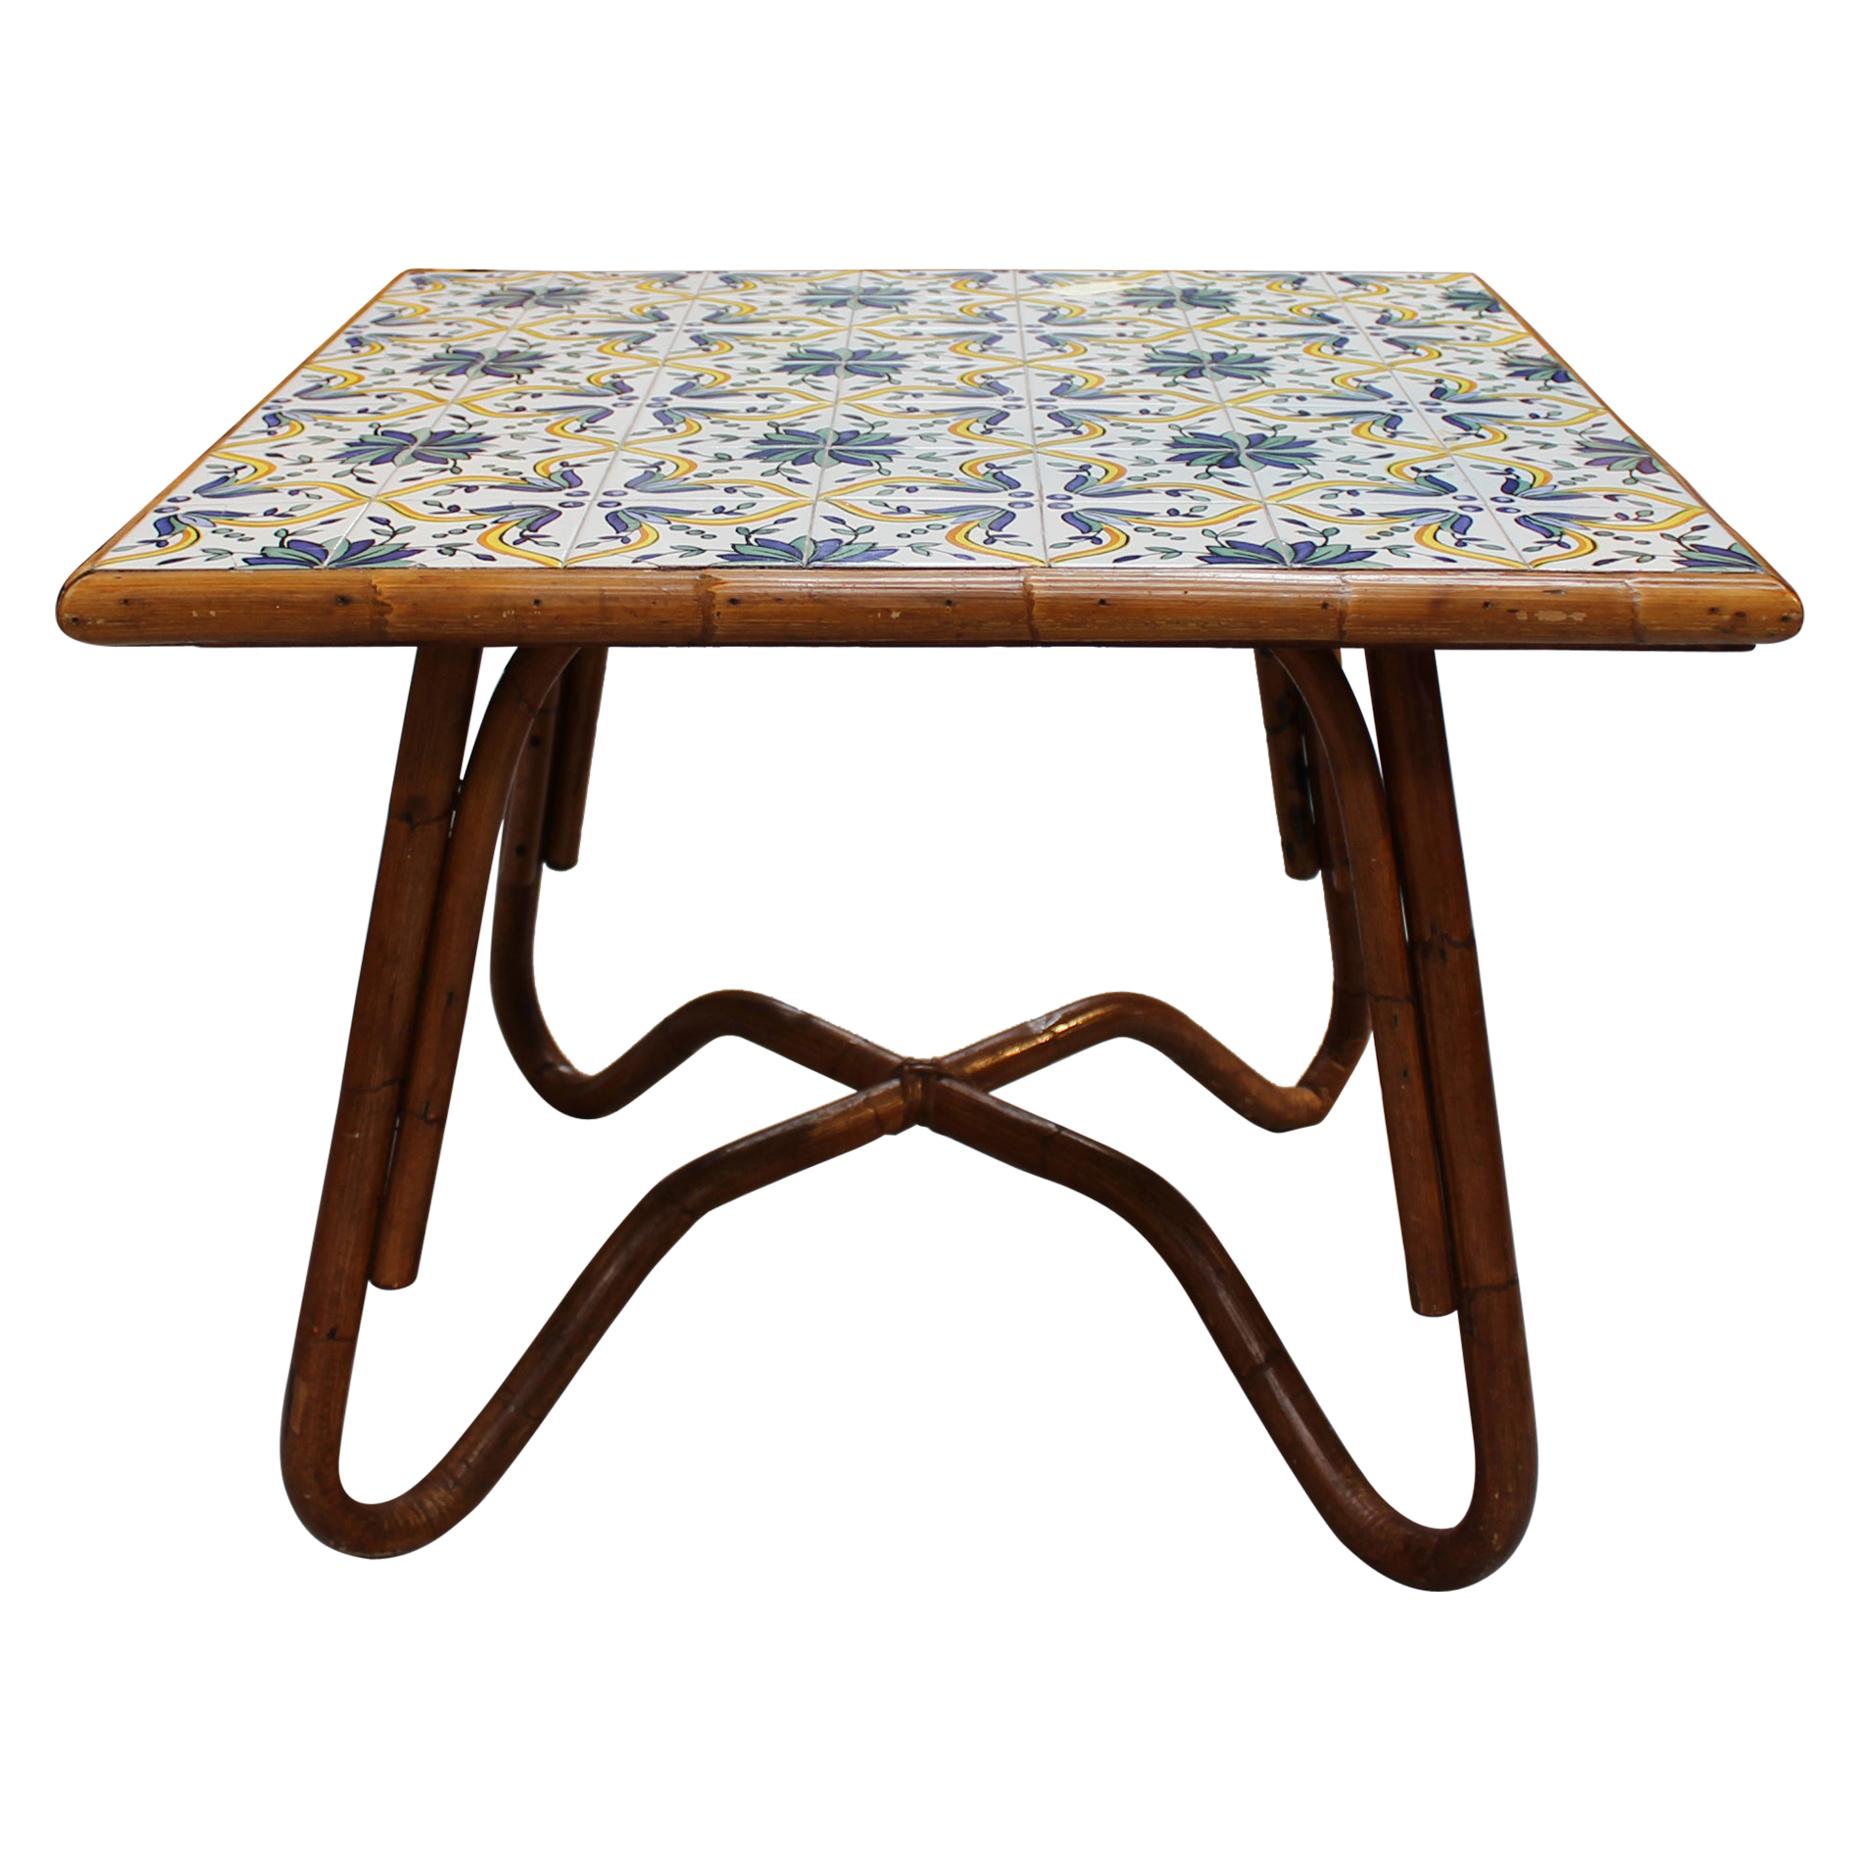 1980s Squared Bamboo and Canework Table with Tiles